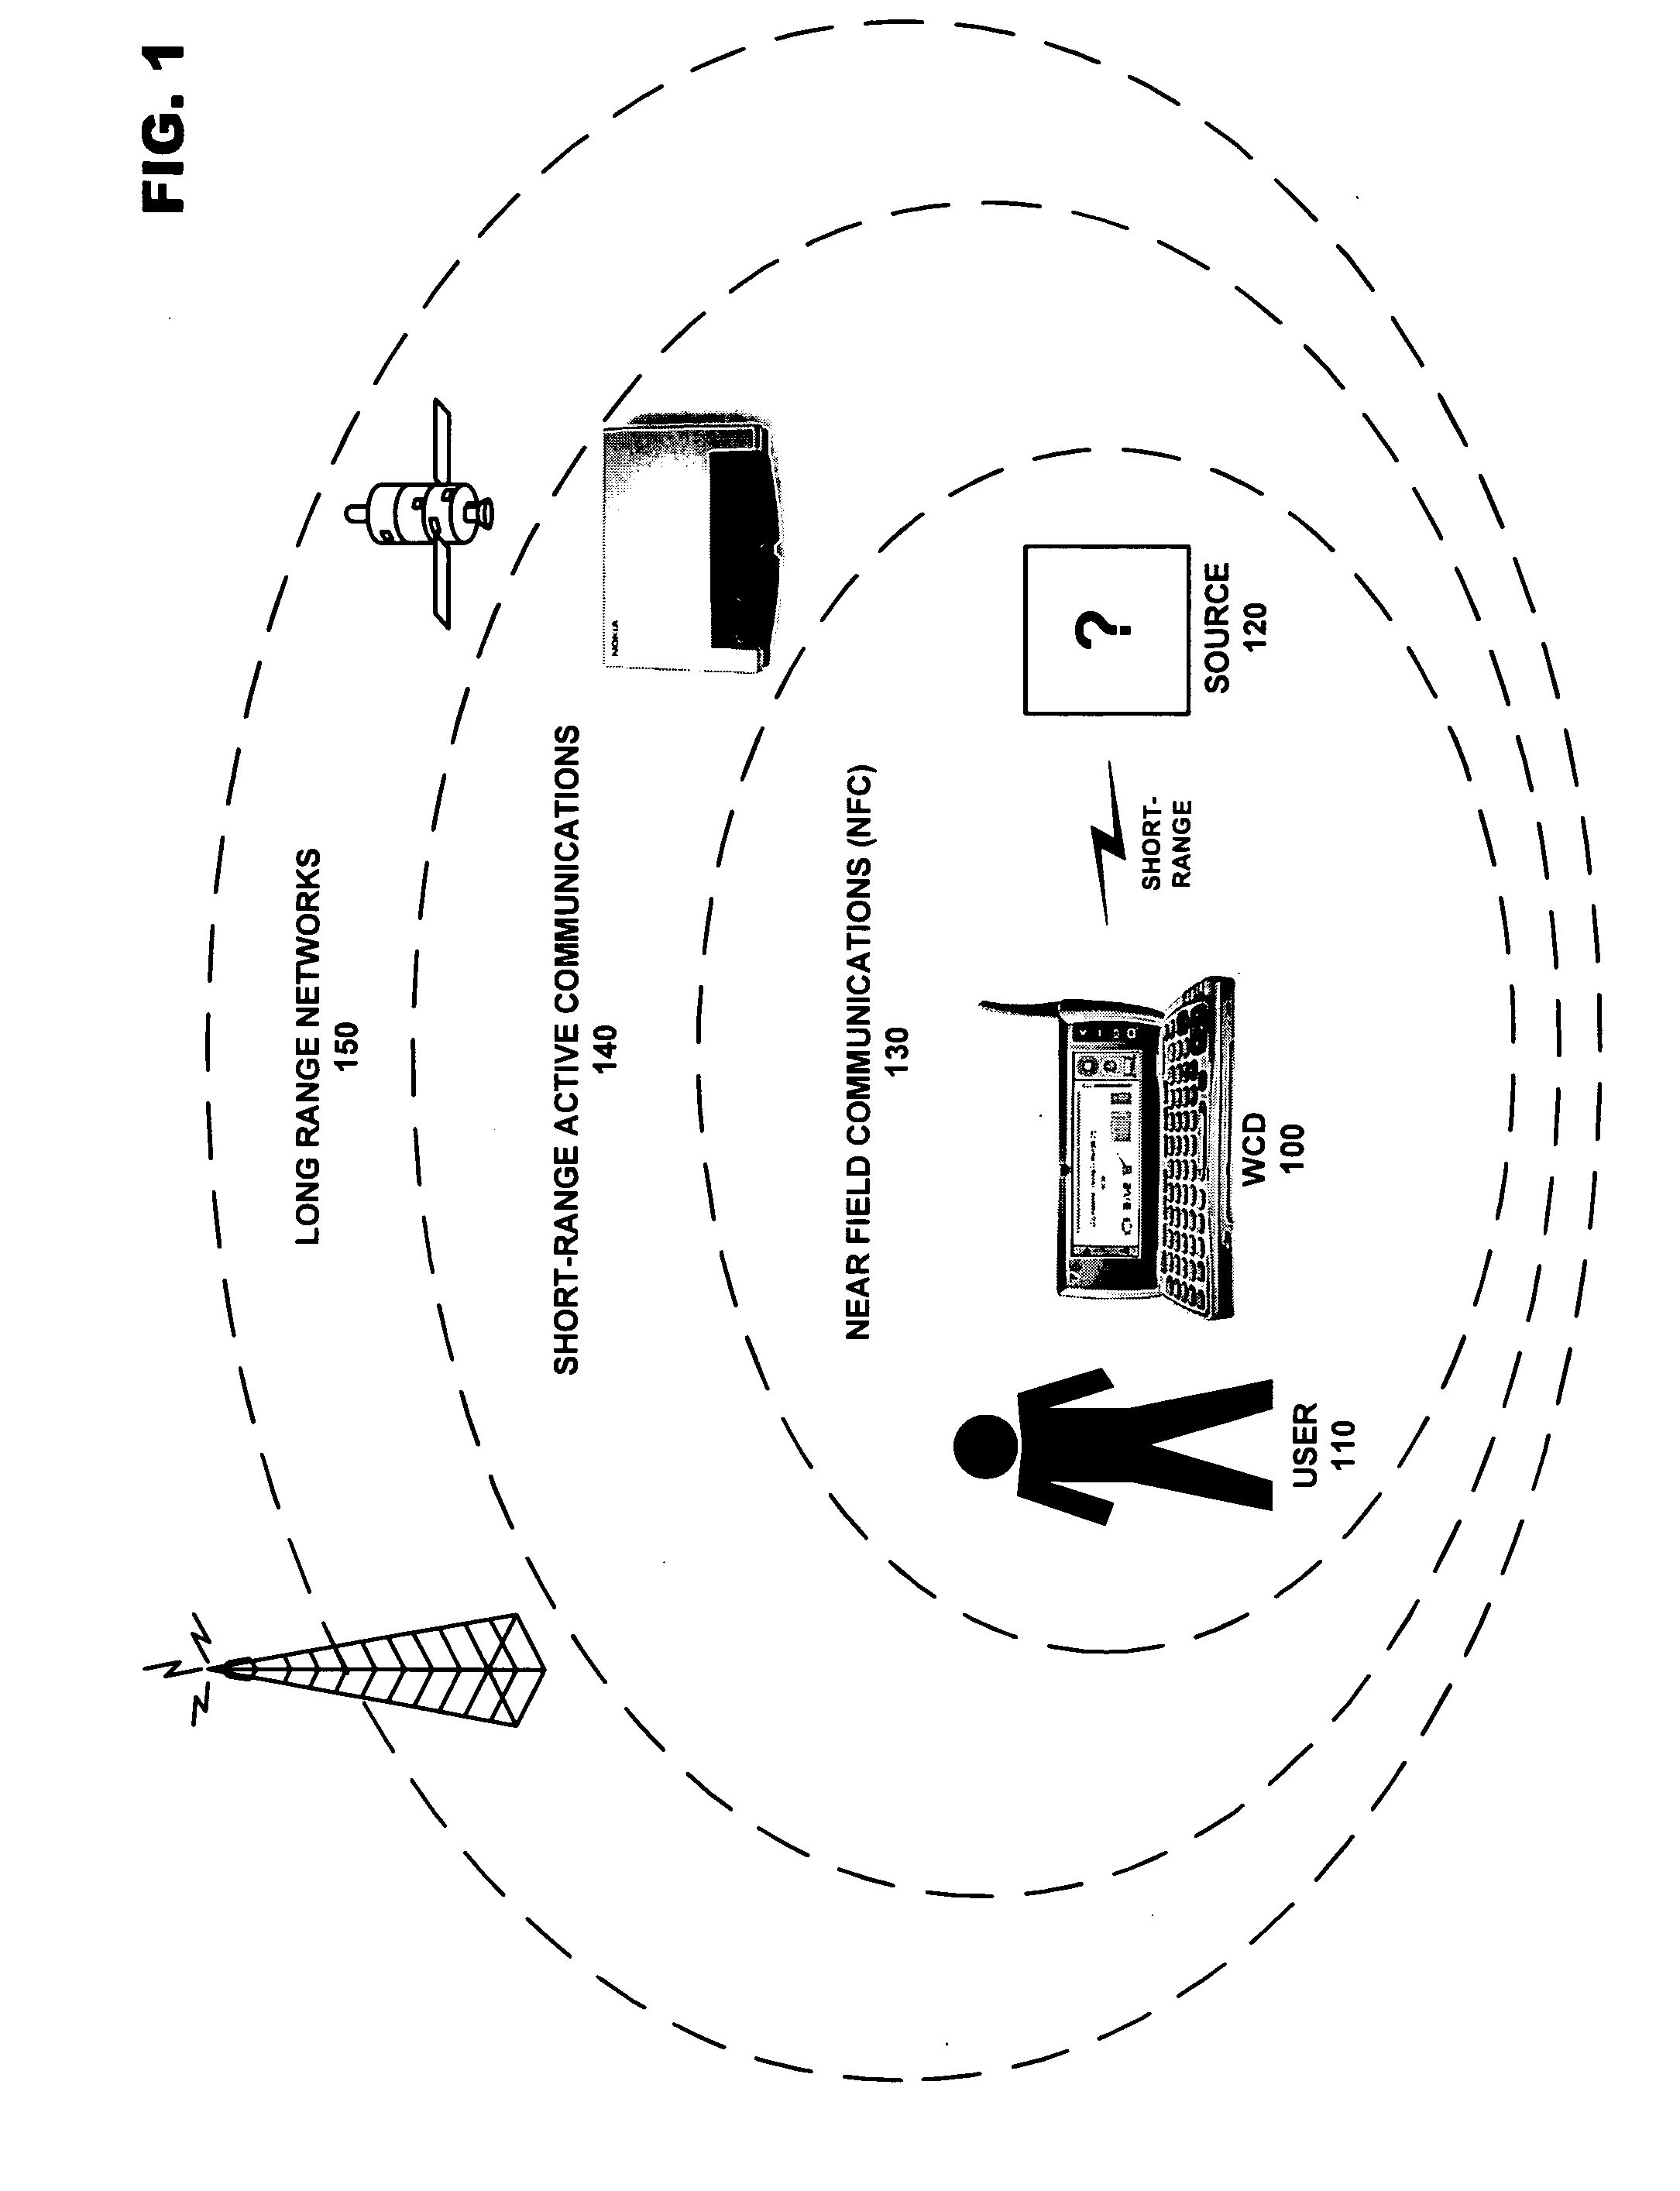 Wireless near field communication control using device state or orientation